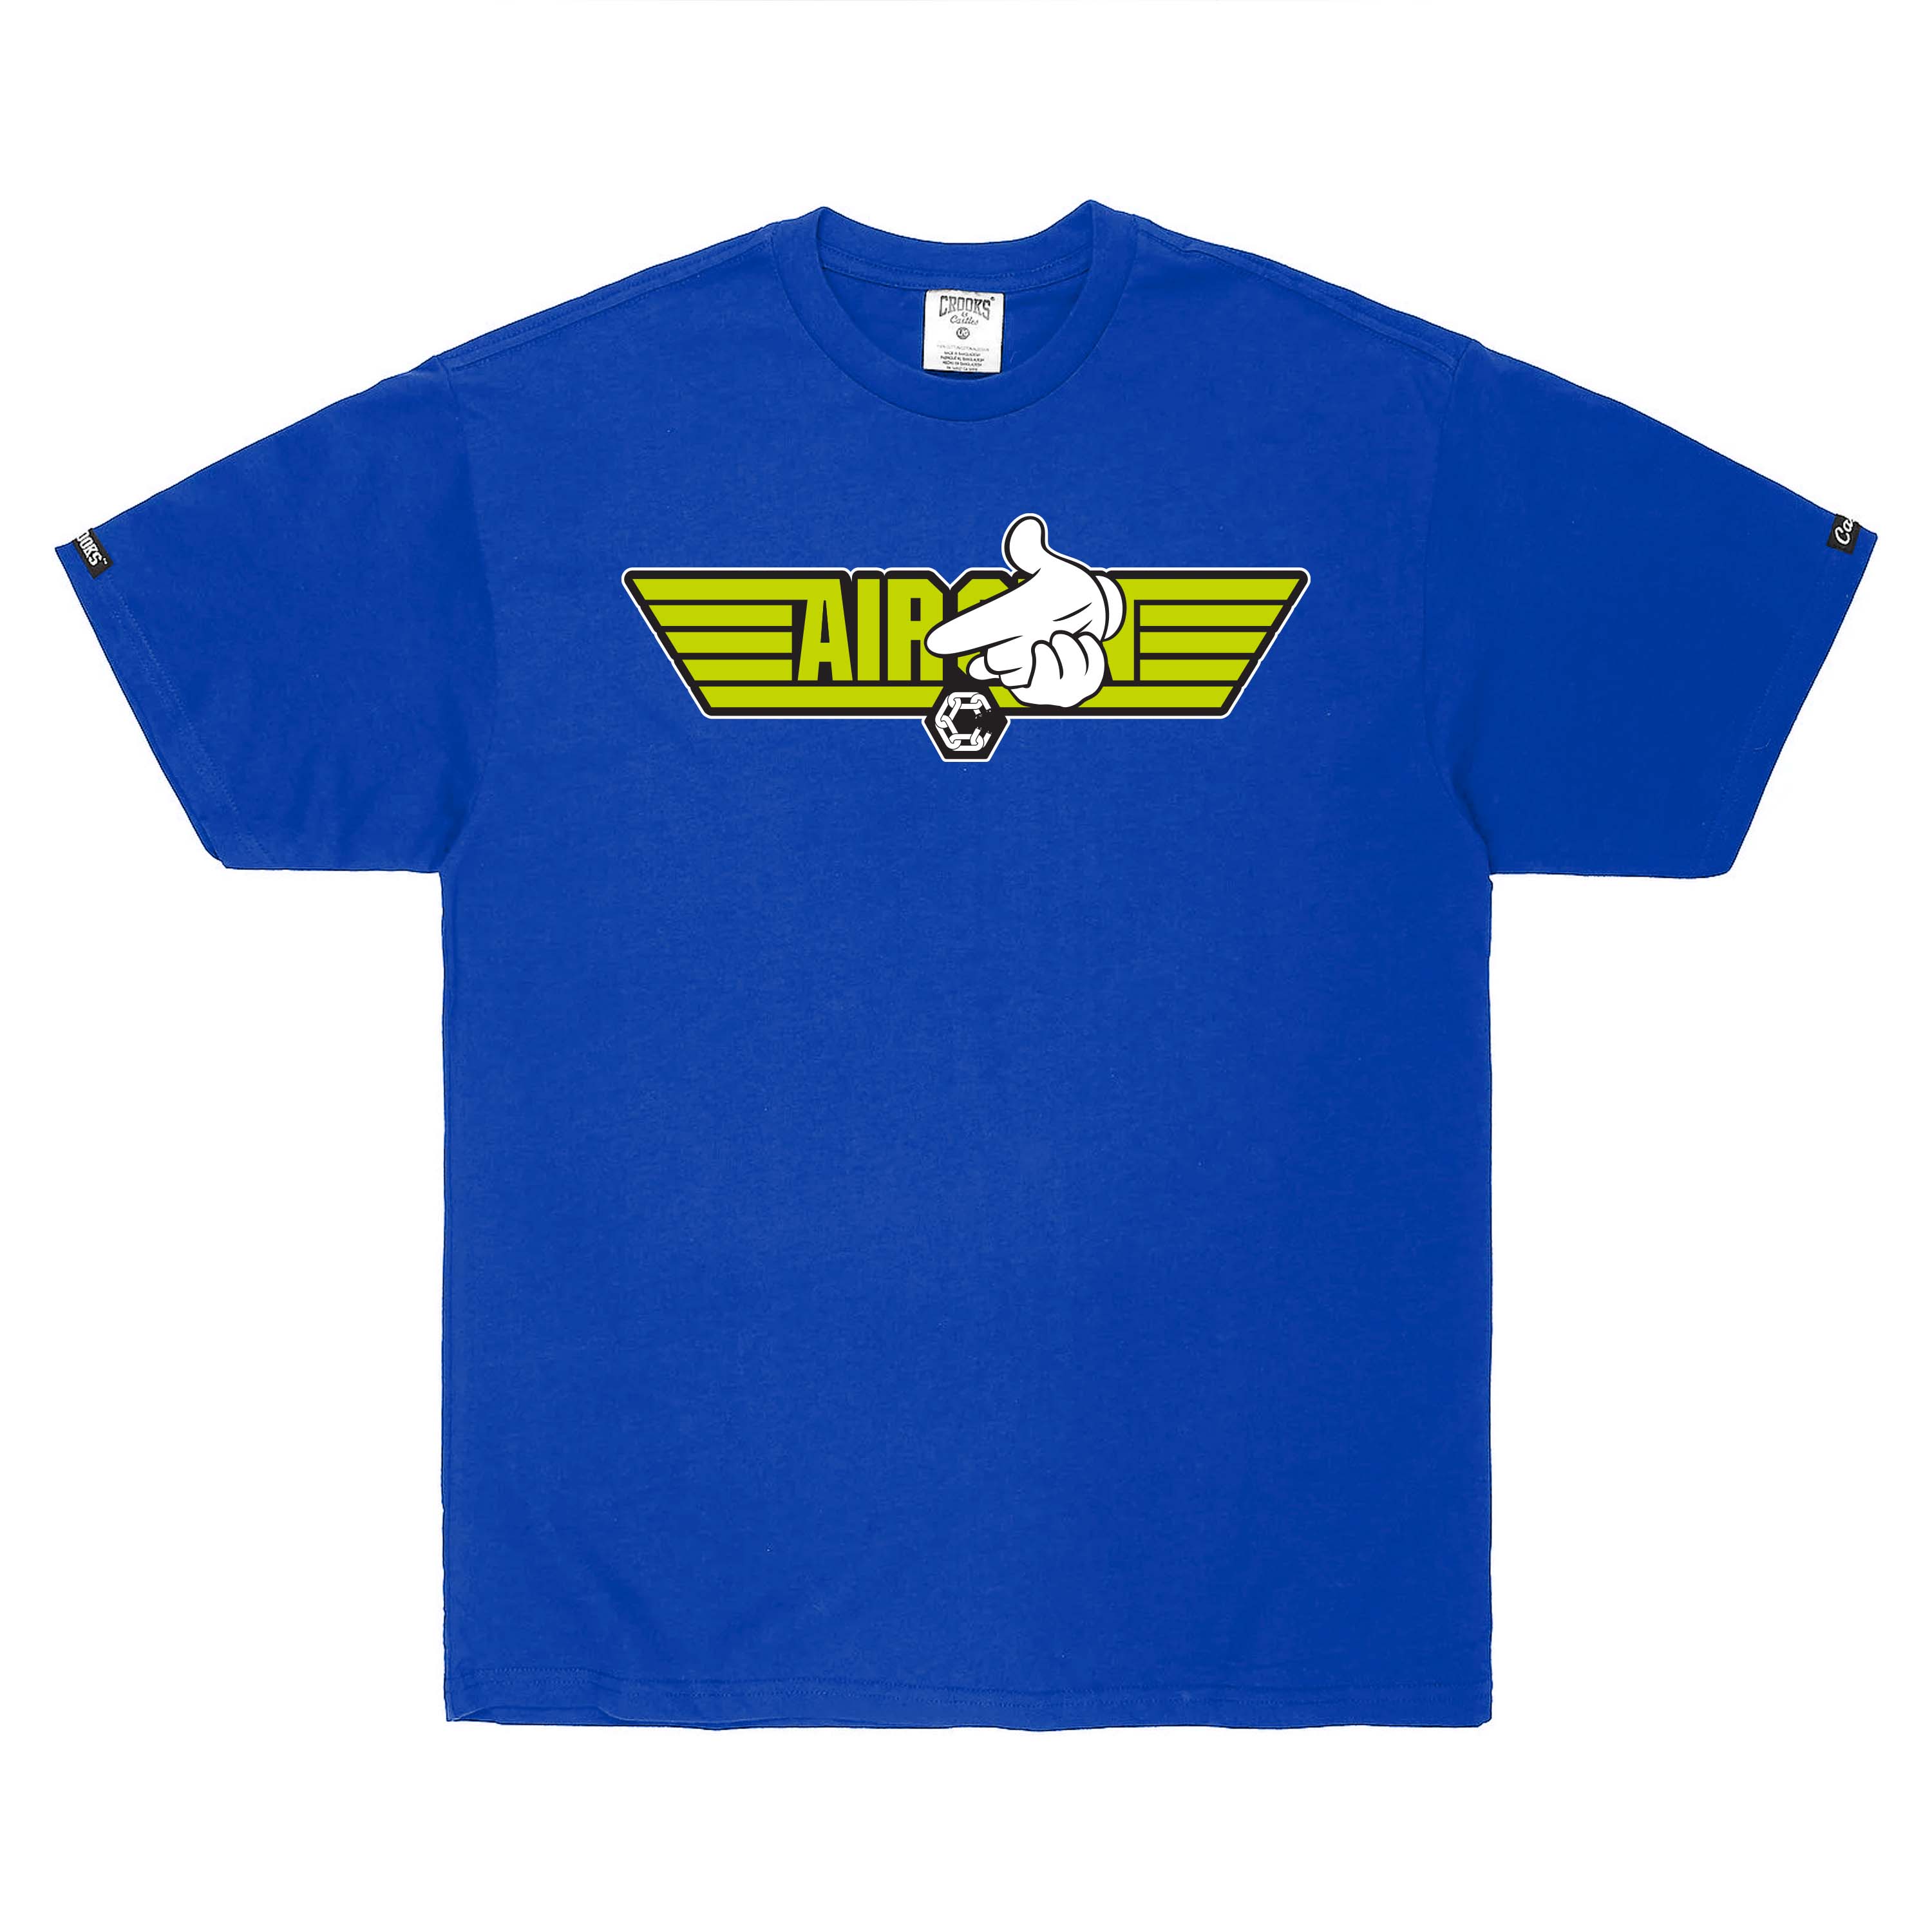 Airwing Tee